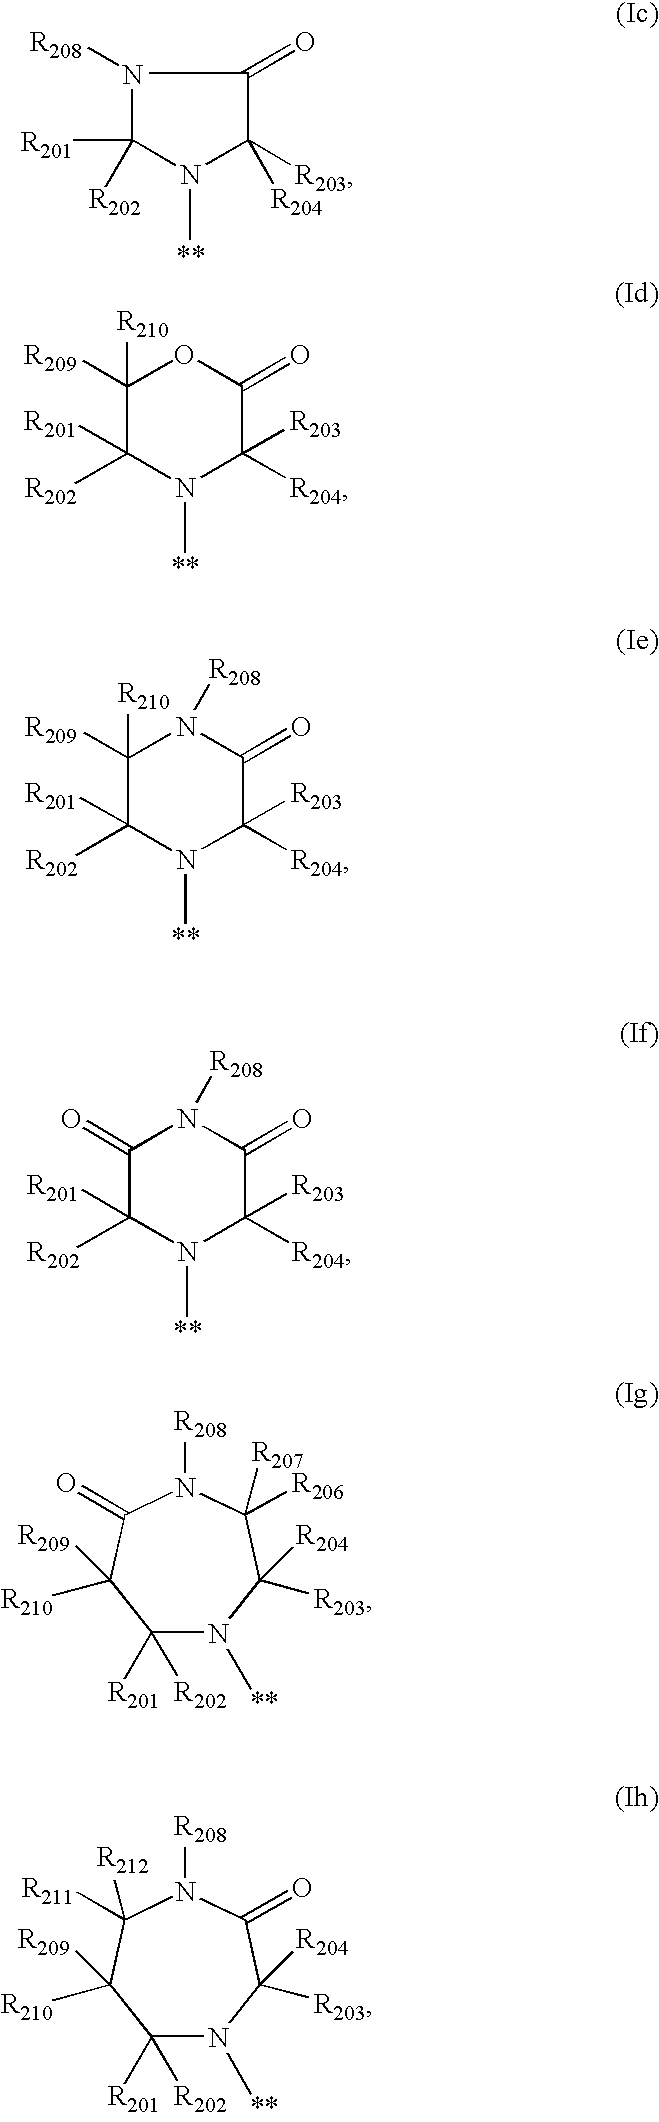 Sunscreen and personal care compositions comprising a select copolymer